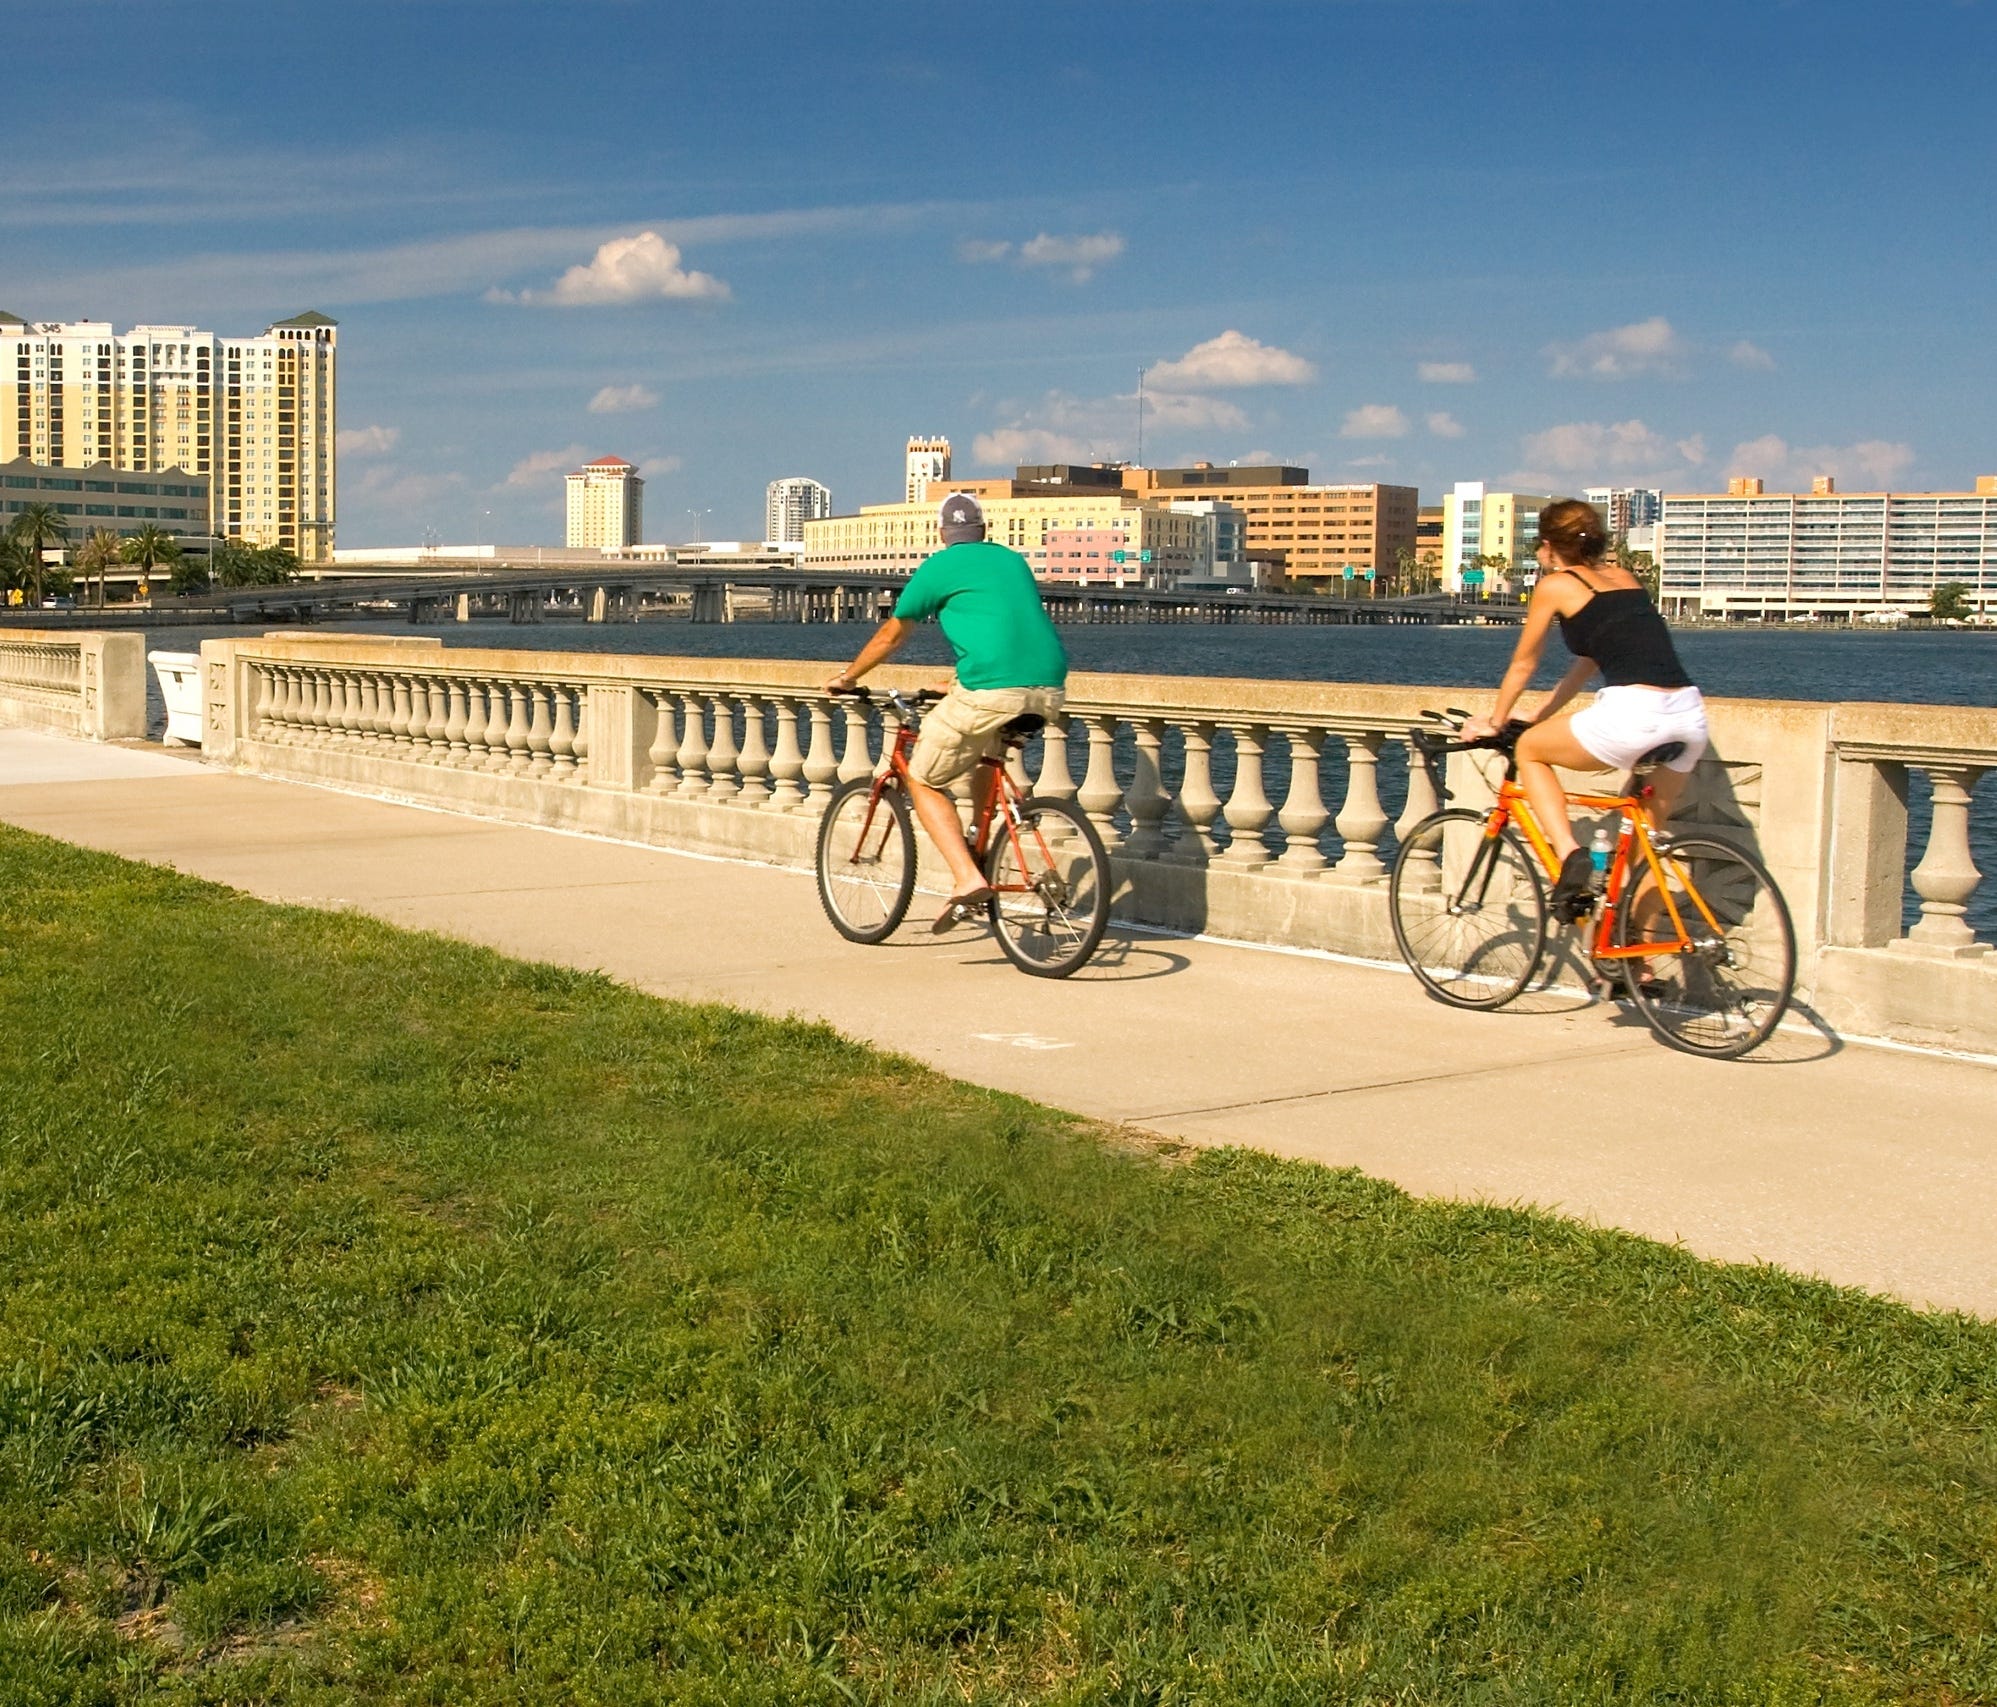 Tampa's Bayshore Boulevard is a popular spot for hikers, joggers and dog walkers.